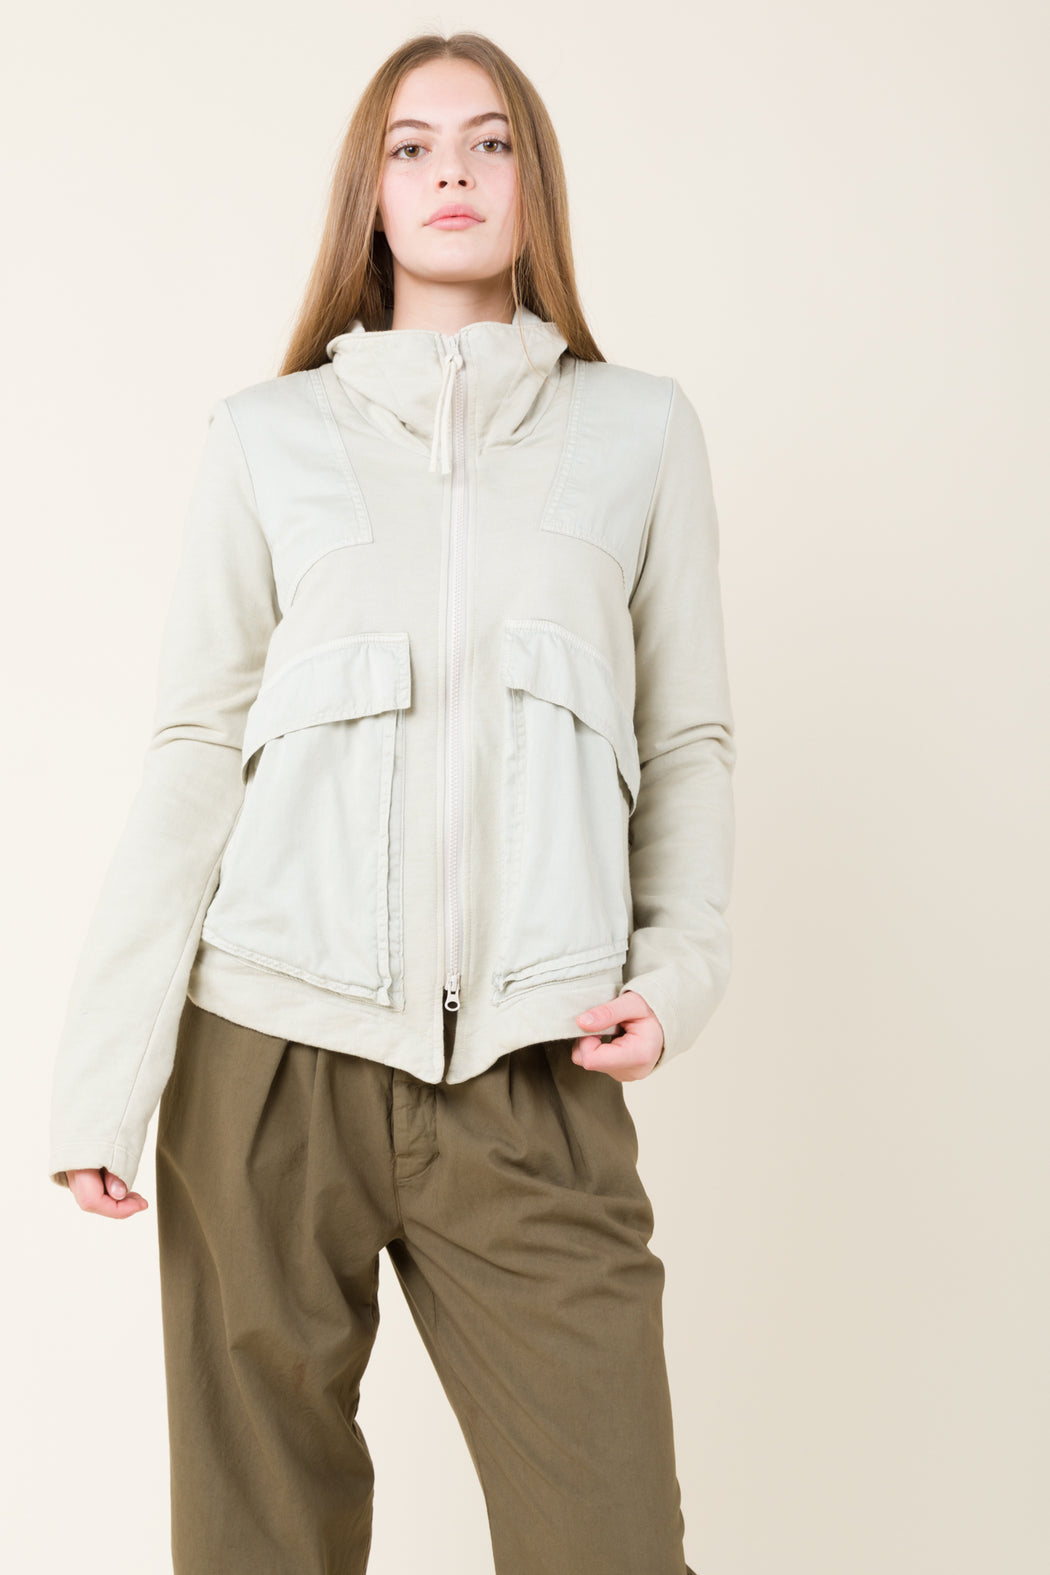 The Hunter jacket is a contemporary zip-up sweatshirt composed of 100% organic cotton, with soft sateen overlays, deep gusseted pockets, and a zip all the way up the neckline, perfect for all-year wear. 